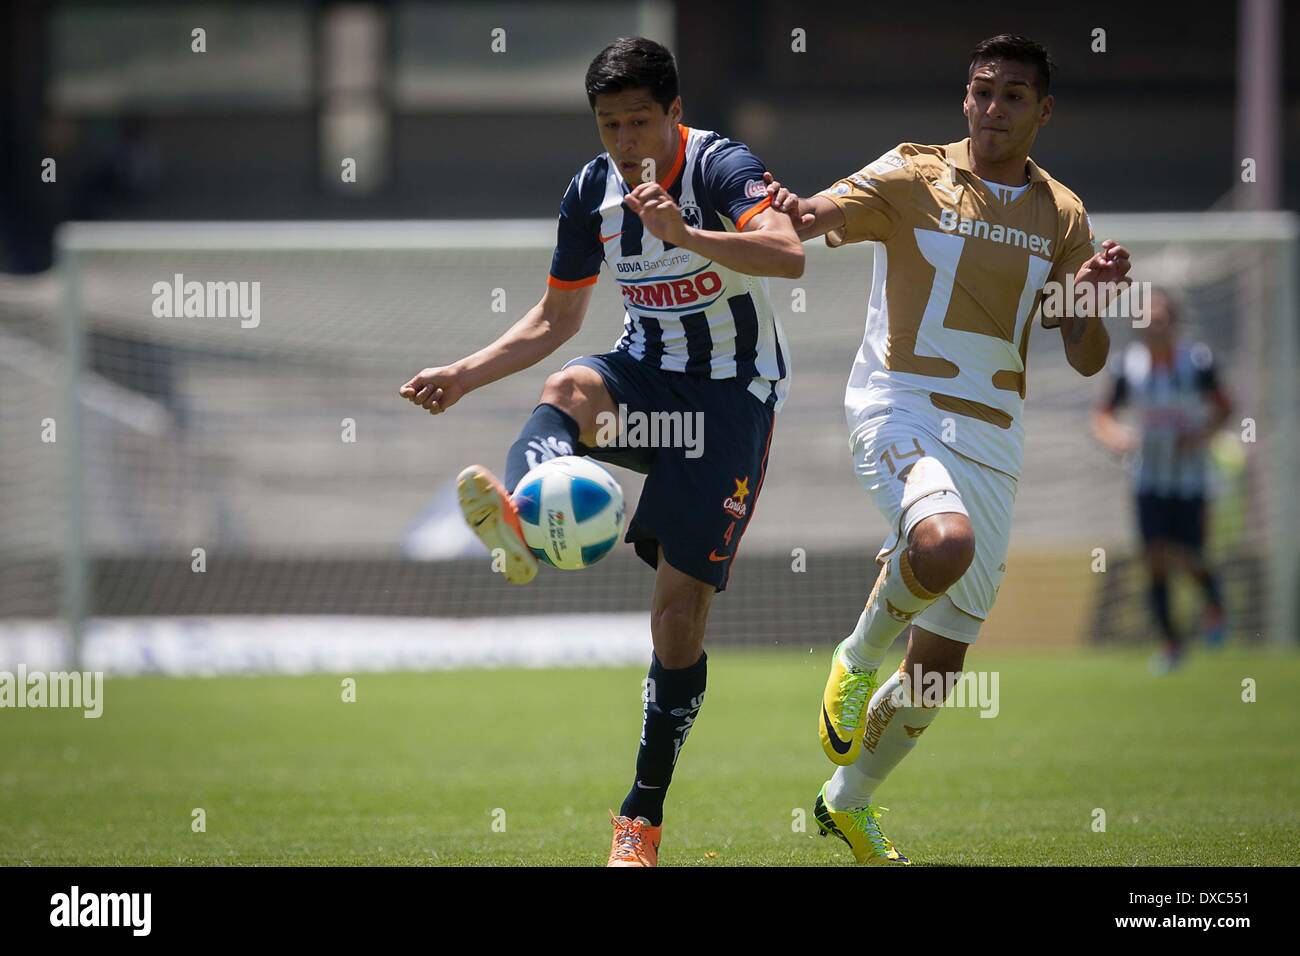 Mexico City, Mexico. 23rd Mar, 2014. Ismael Sosa (R) of UNAM's Pumas vies for the ball with Ricardo Osorio of Monterrey during a match of the 2014 MX League Closing Tournament at University Olympic Stadium in Mexico City, capital of Mexico, on March 23, 2014. © Pedro Mera/Xinhua/Alamy Live News Stock Photo